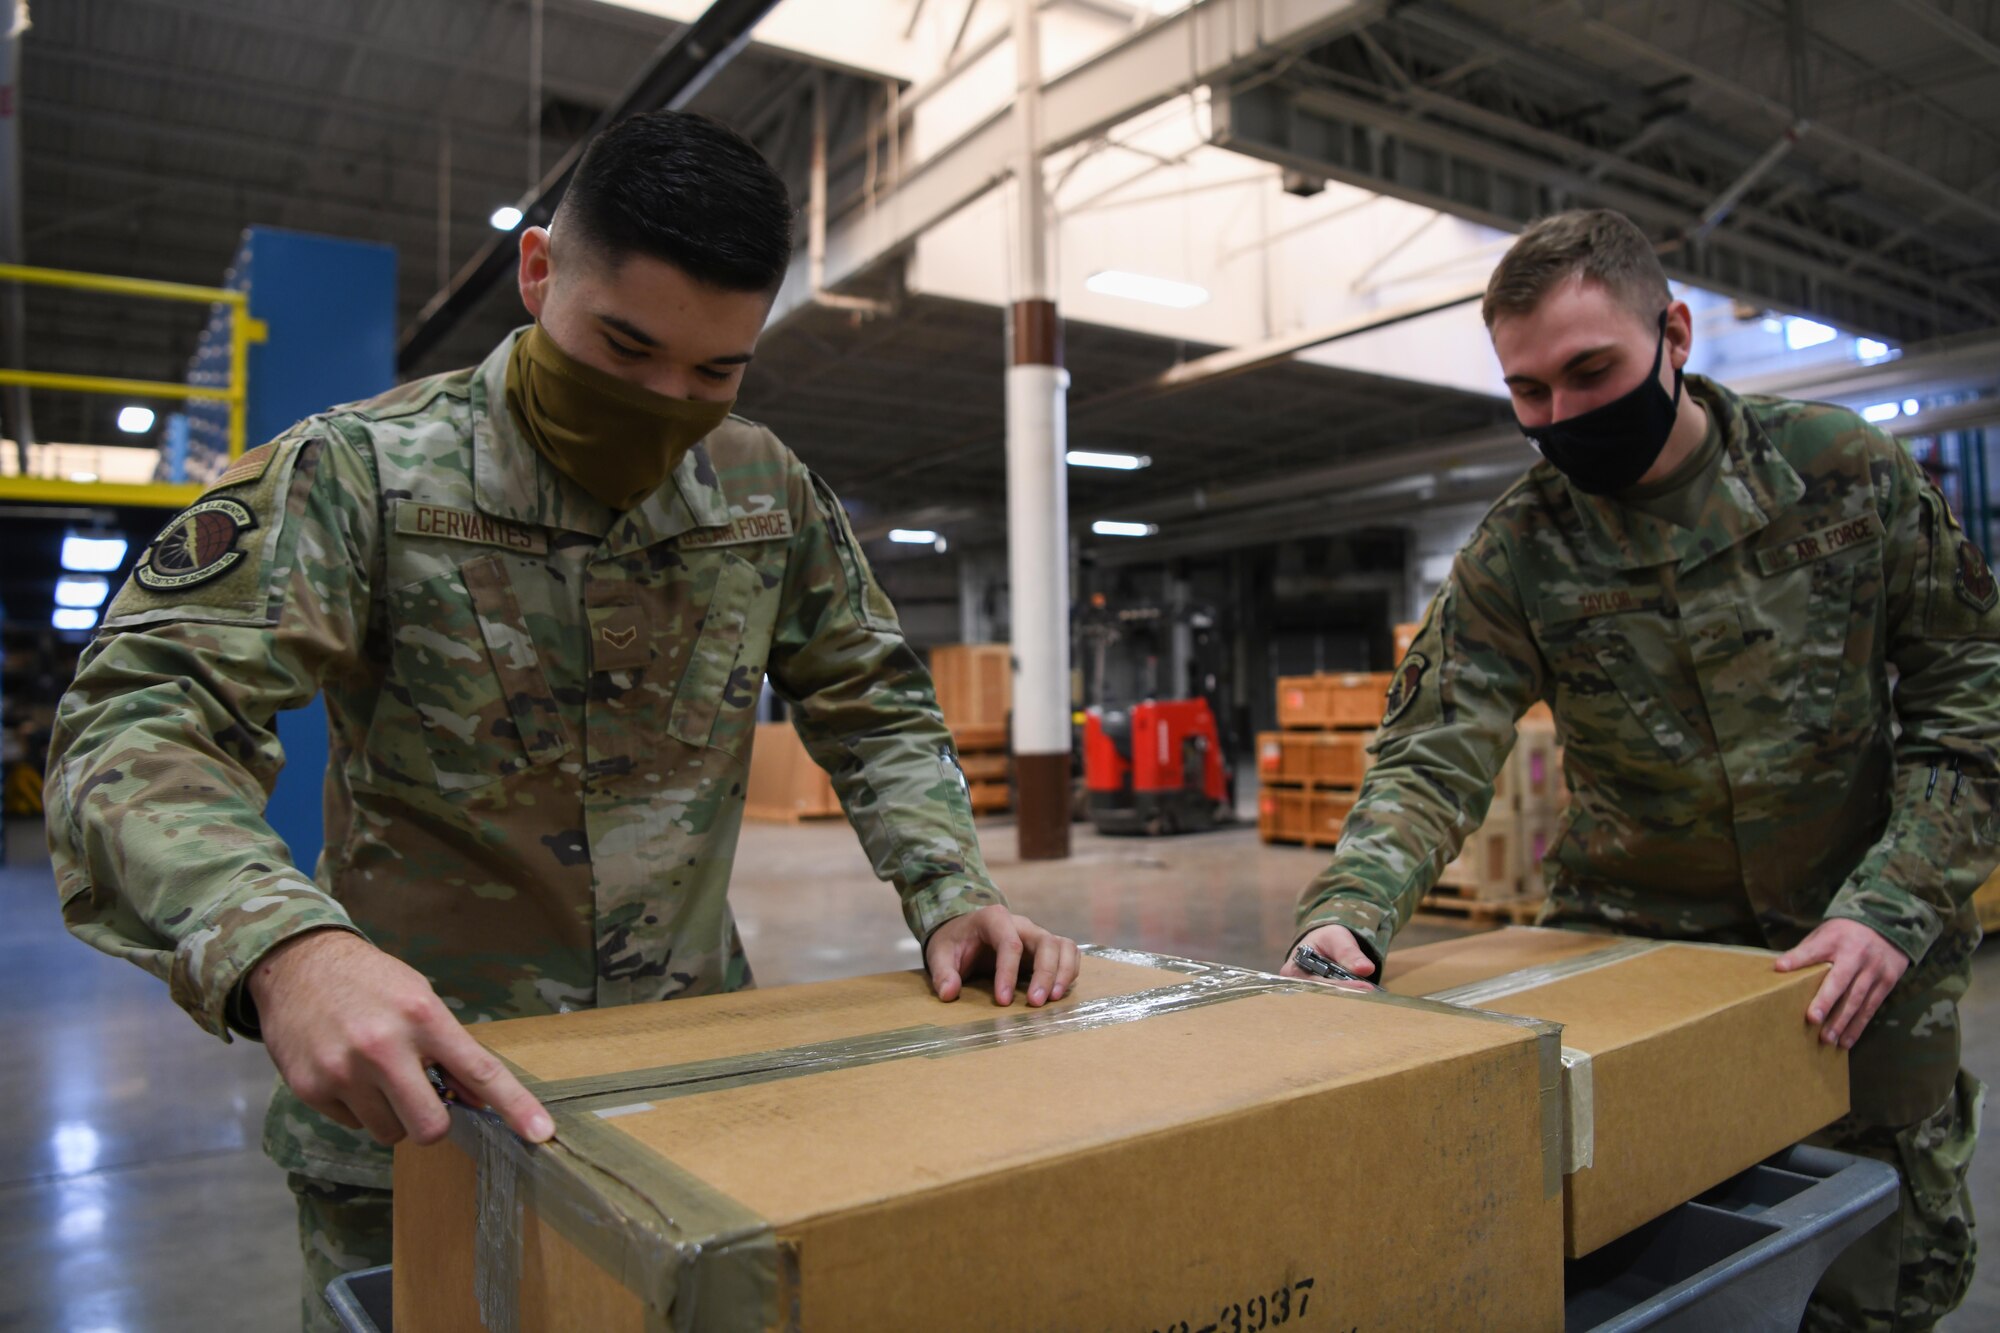 Airman 1st Class Atruro Cervantes, supply technician (left), and Airman 1st Class Ryan Taylor, customer service journeyman, both assigned to the 90th Logistics Readiness Squadron, open boxes at the Military Personnel Flight building on F.E. Warren Air Force Base, Wyoming, Feb. 9, 2022. The 90 LRS Material Management Flight must inspect incoming boxes to ensure they have received the correct assets and quantities. These assets are distributed throughout F.E. Warren AFB to support the mission of strategic nuclear deterrence. (U.S. Air Force photo by Airman 1st Class Charles Munoz)